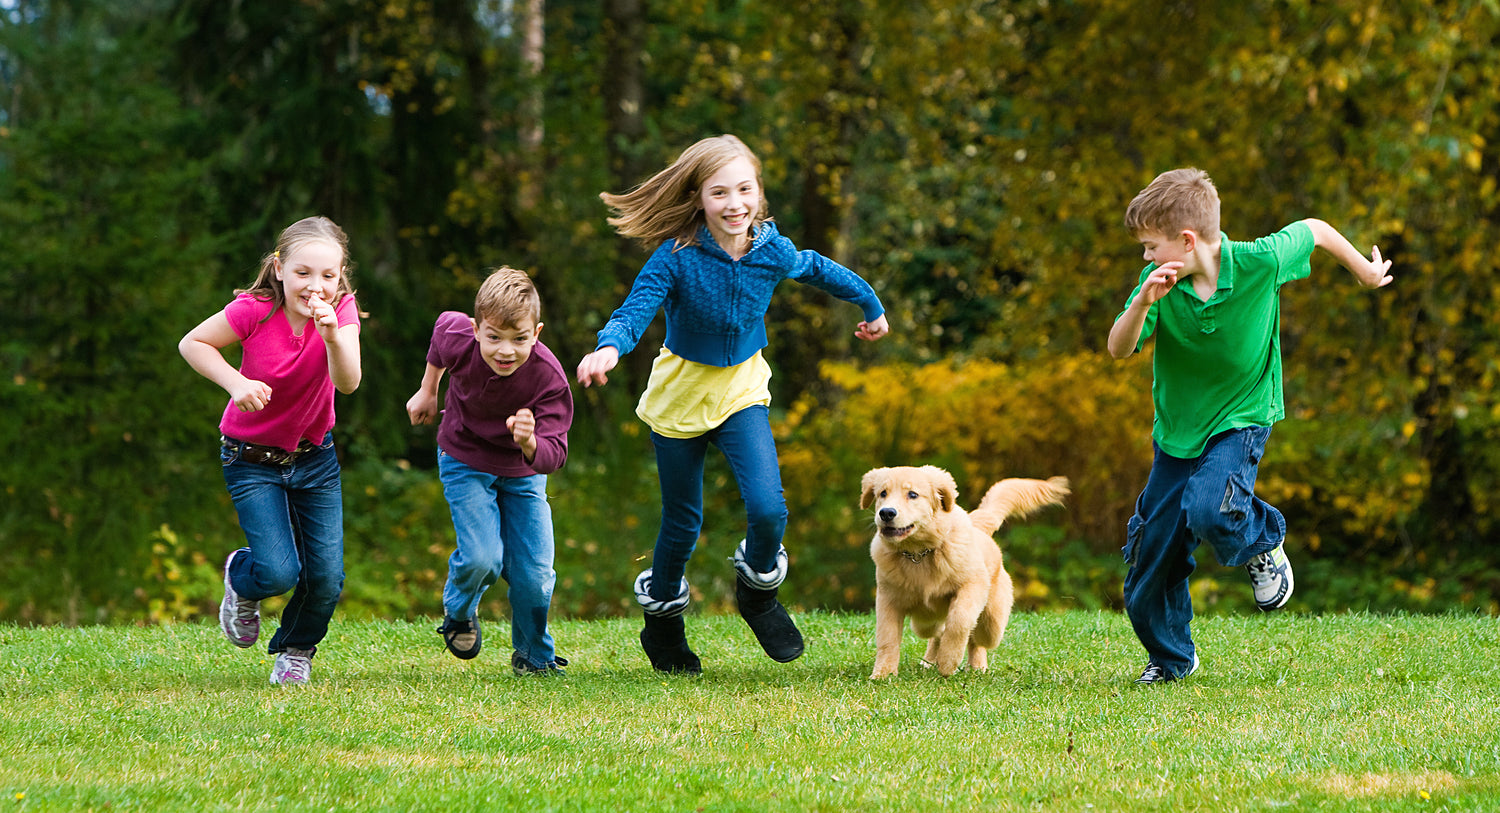 How To Keep Your Dog & Kids Safe When Playing Together